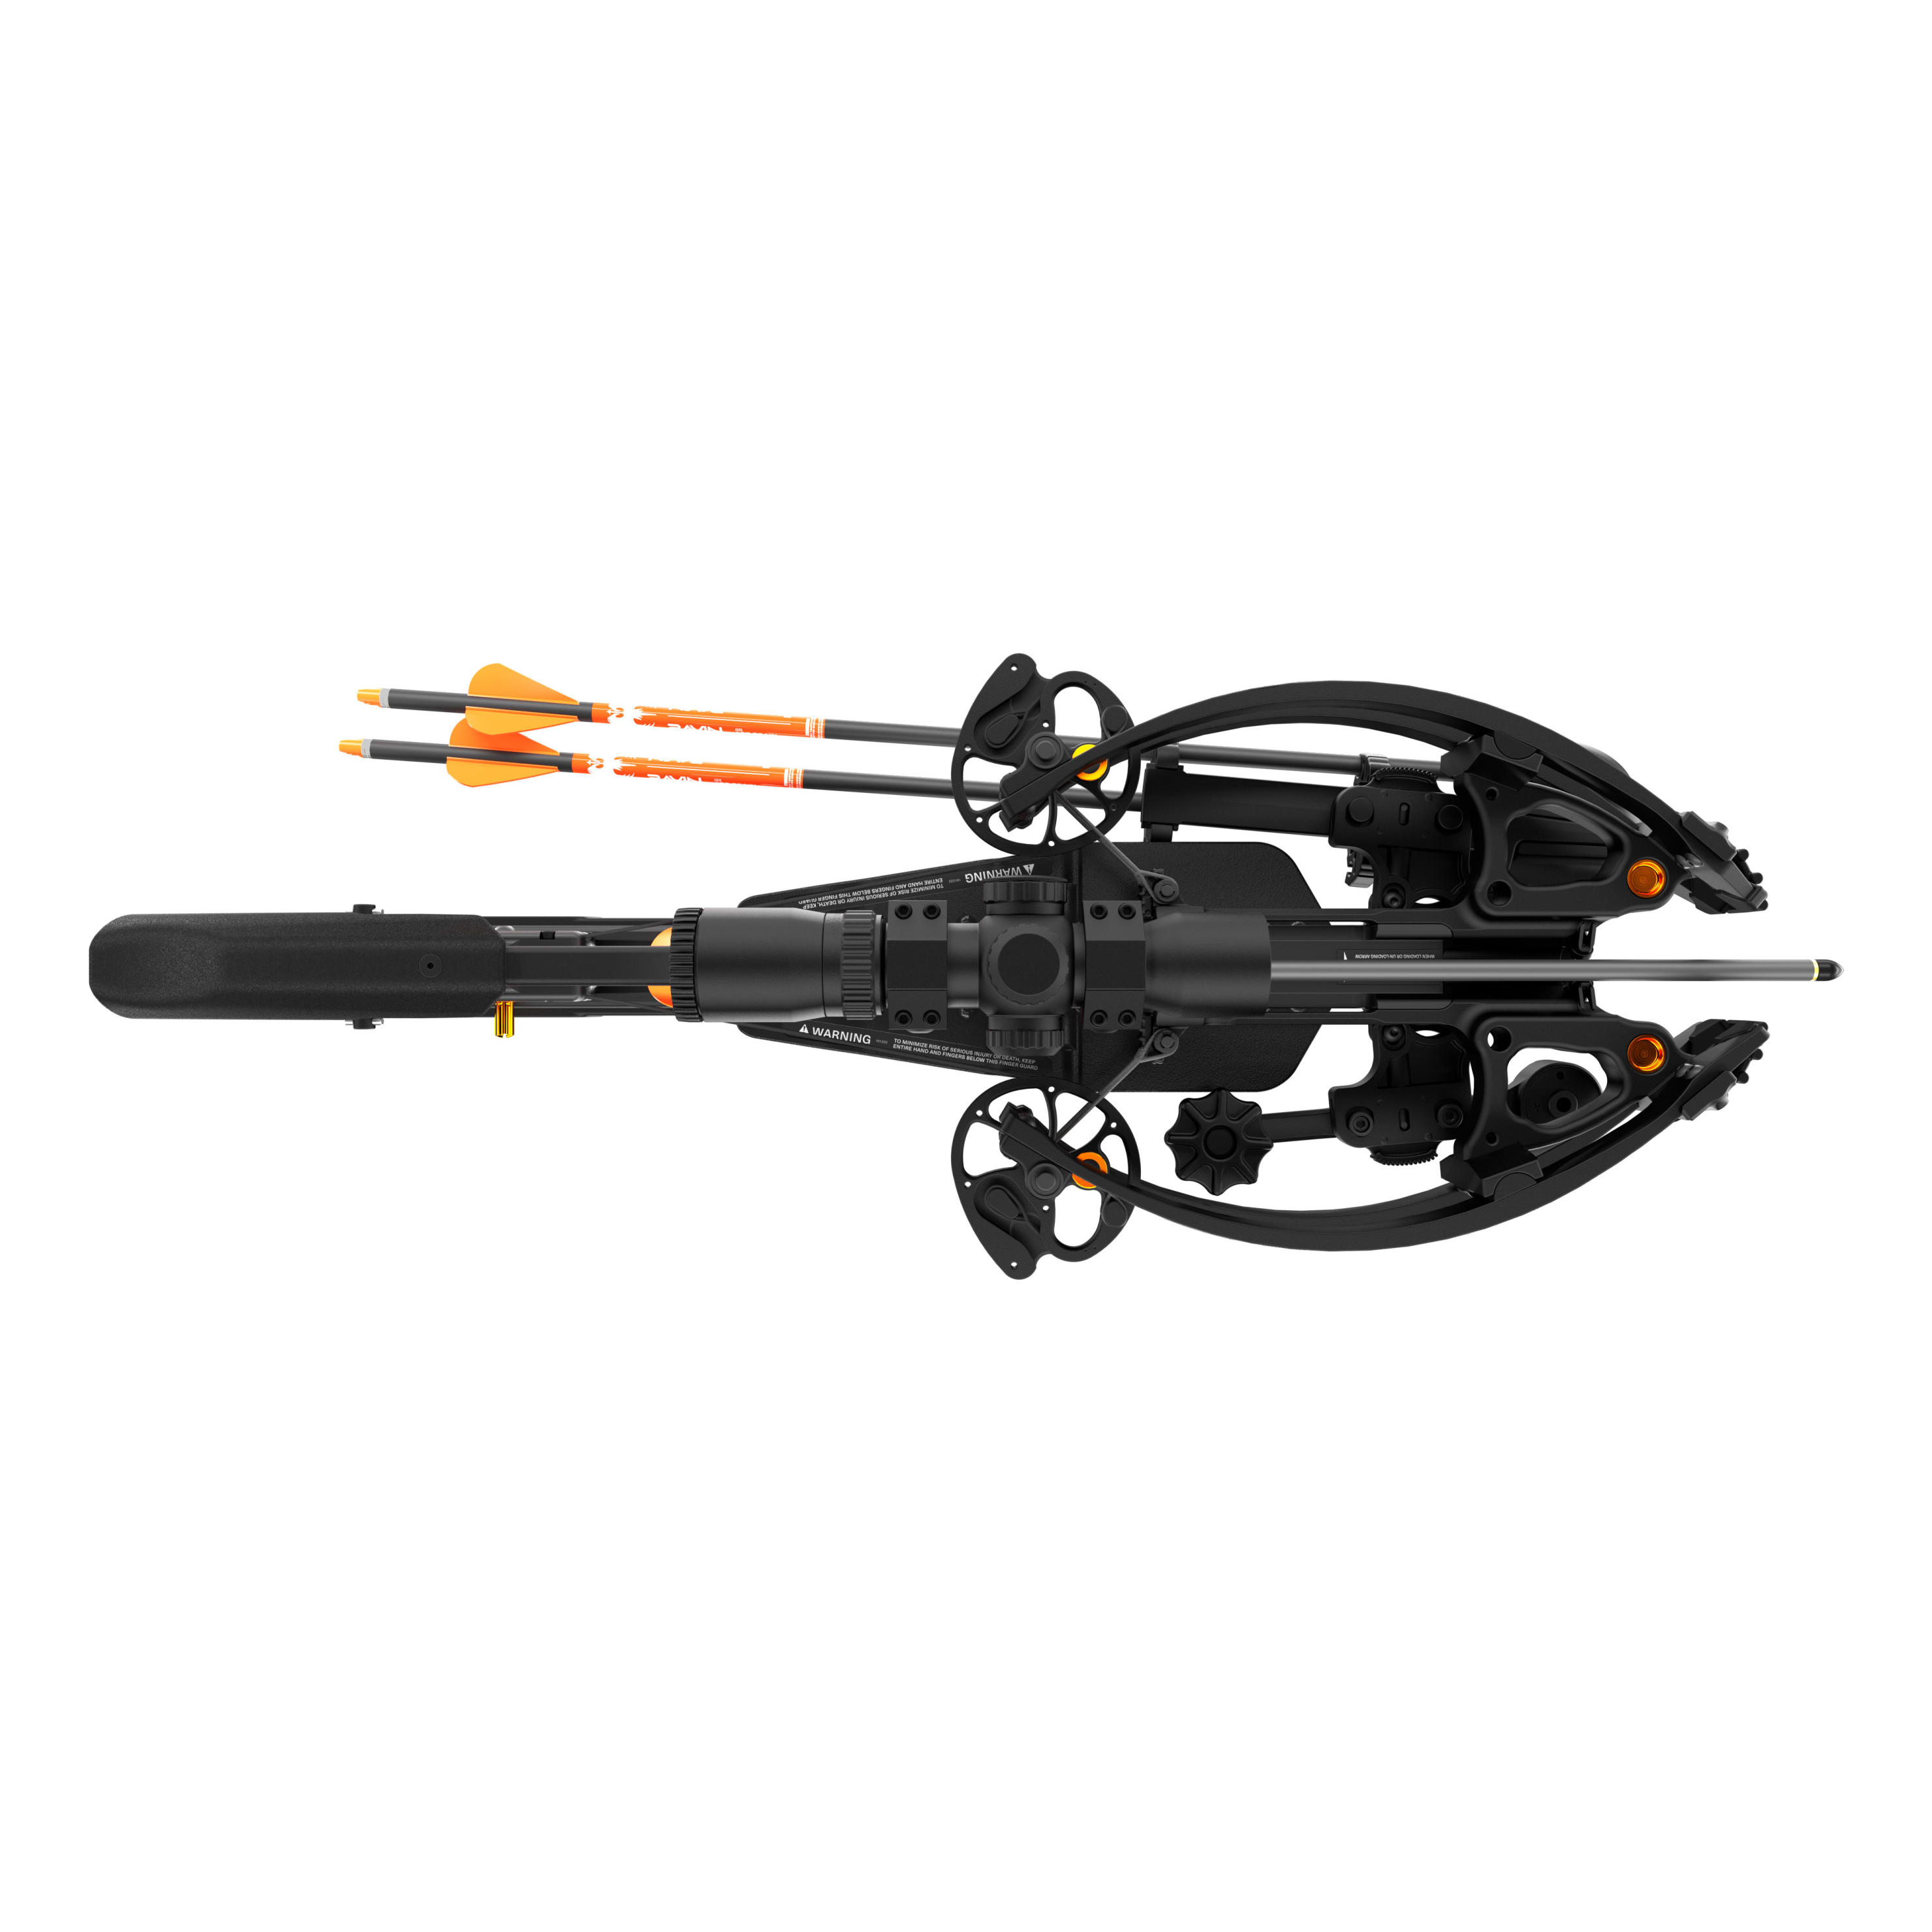 Ravin® R26X Crossbow Package